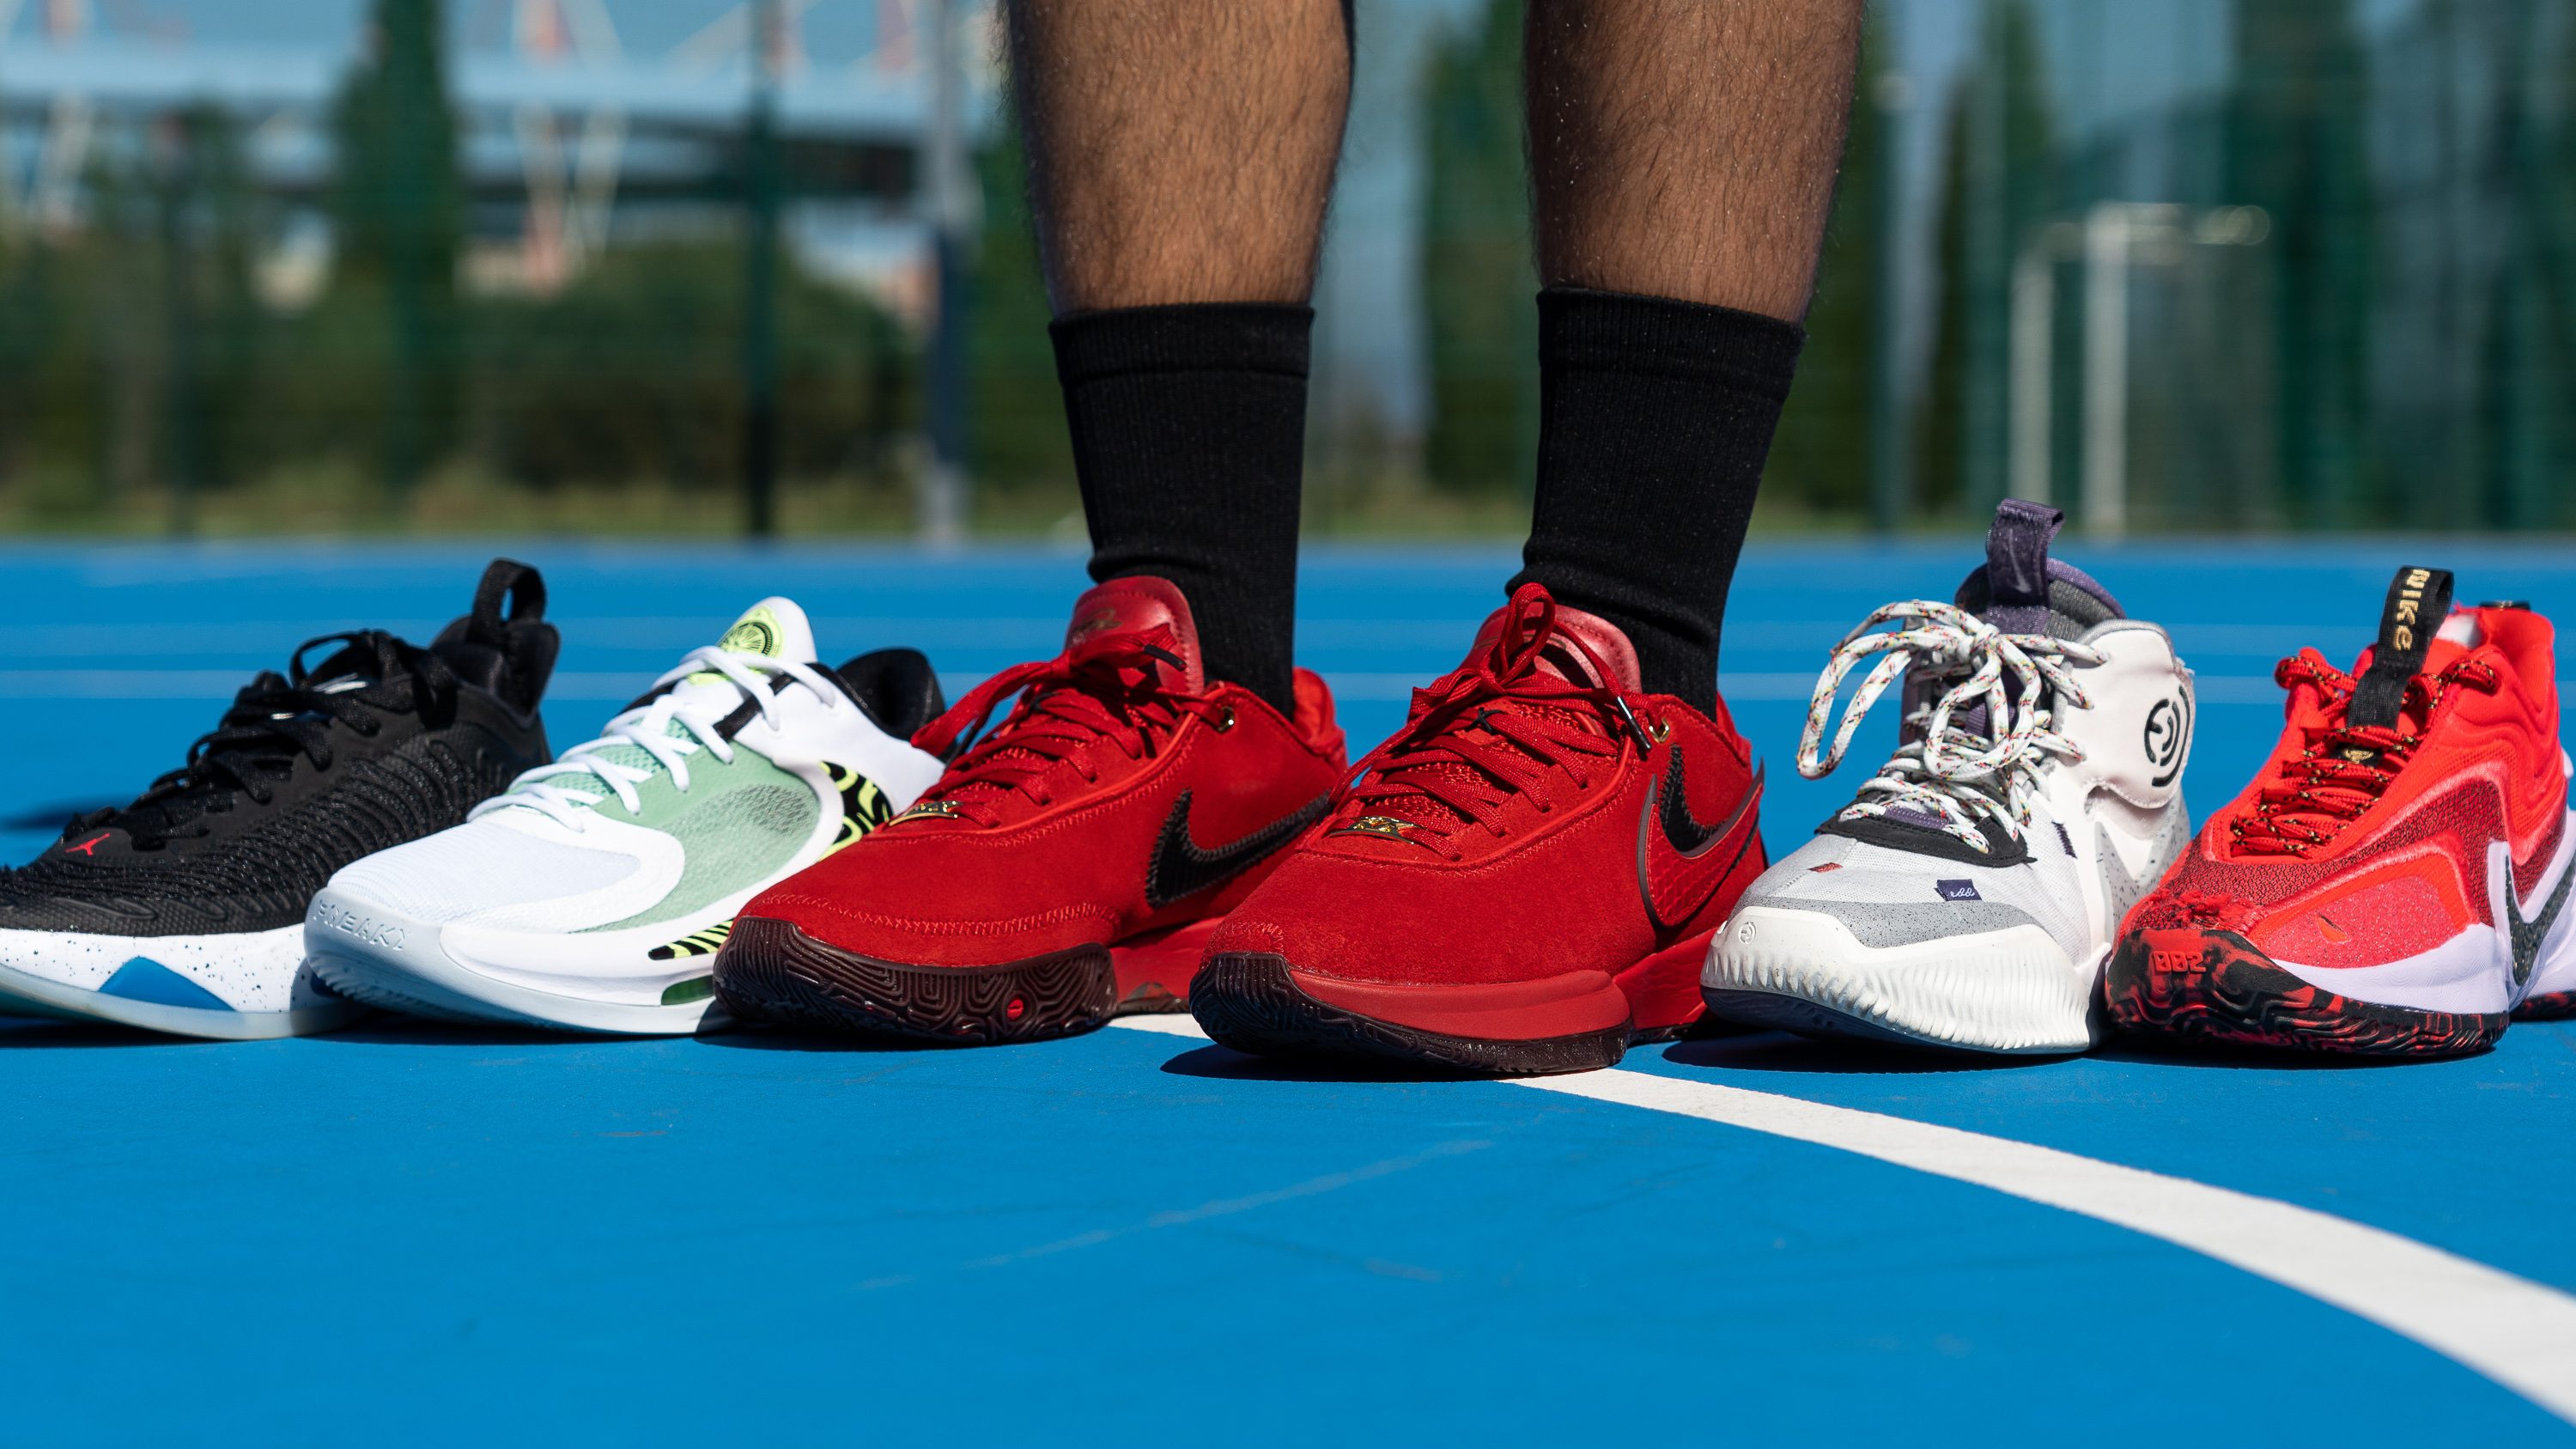 4 Best New Basketball Shoes